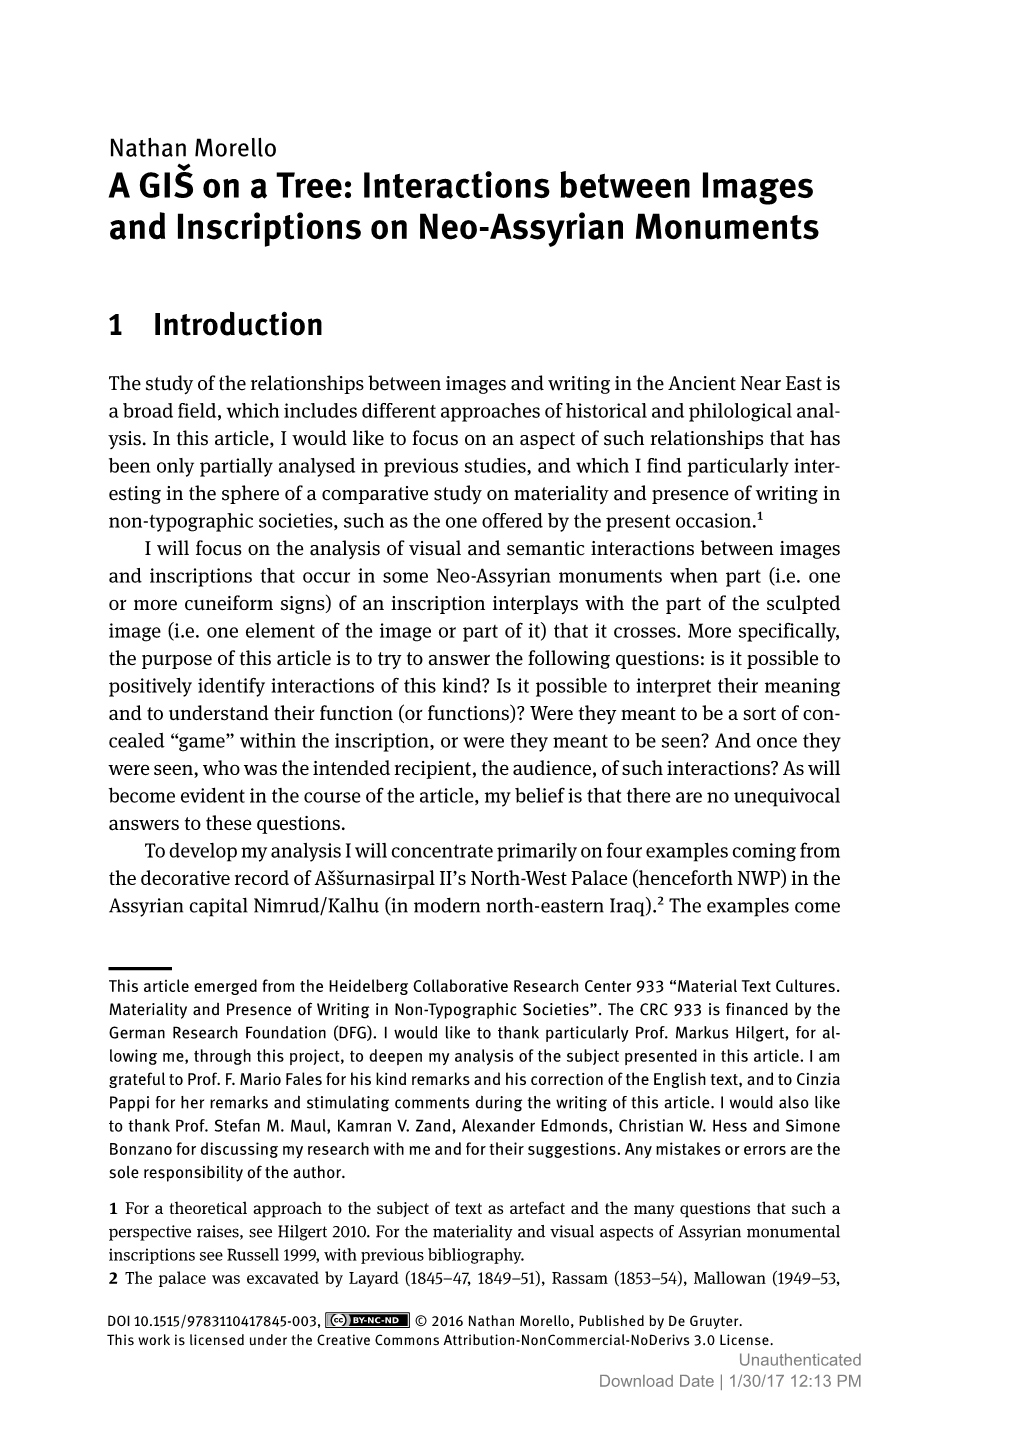 A Giš on a Tree: Interactions Between Images and Inscriptions on Neo-Assyrian Monuments